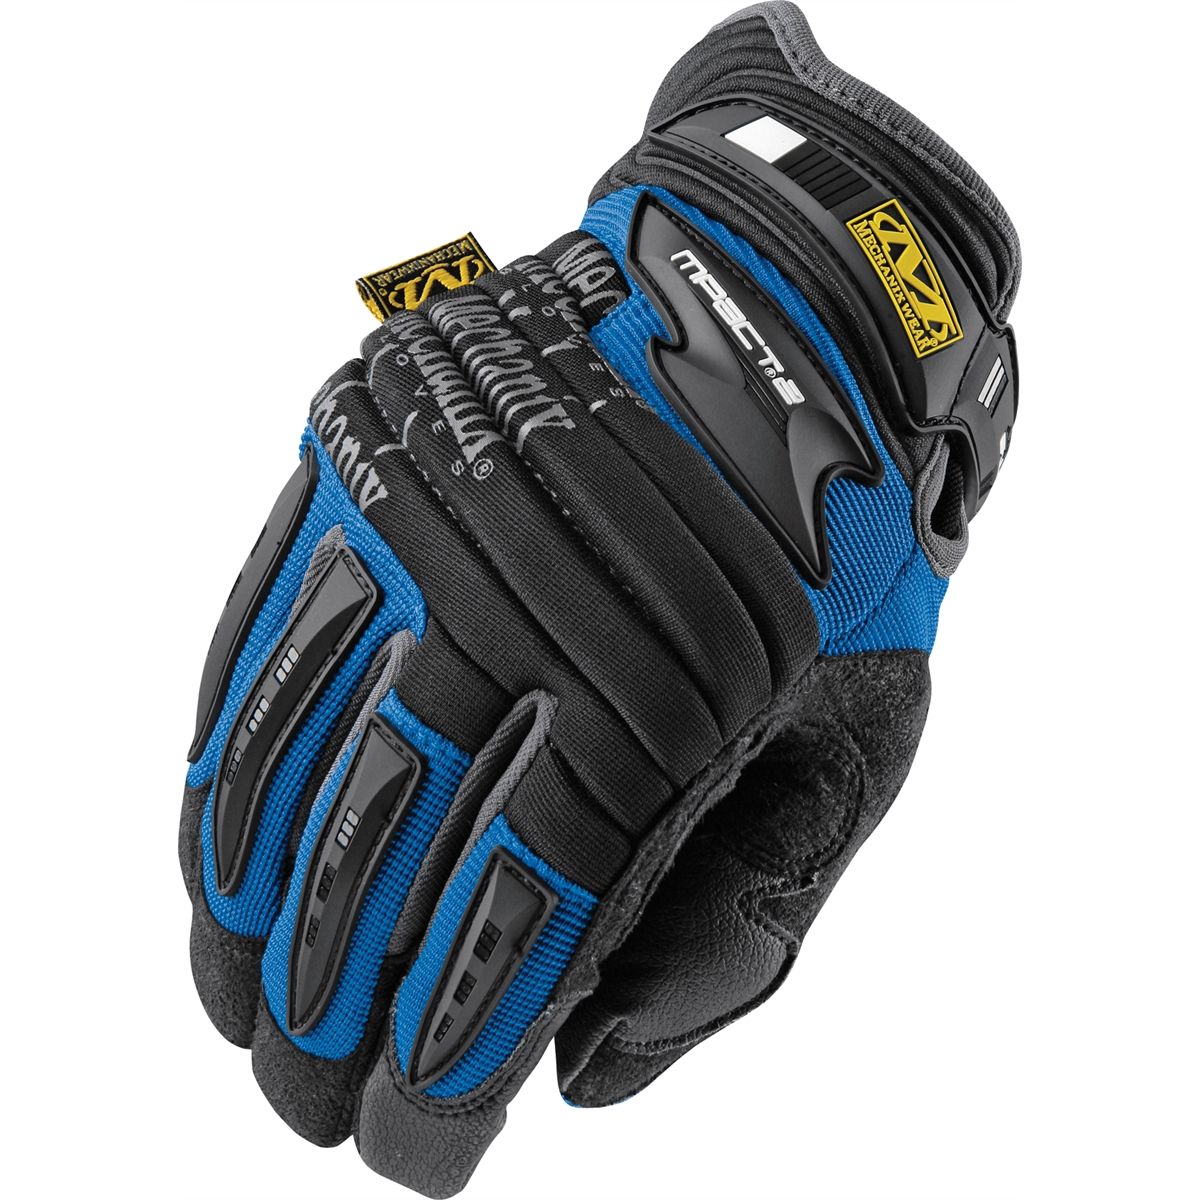 M-Pact II Gloves - Blue - Large